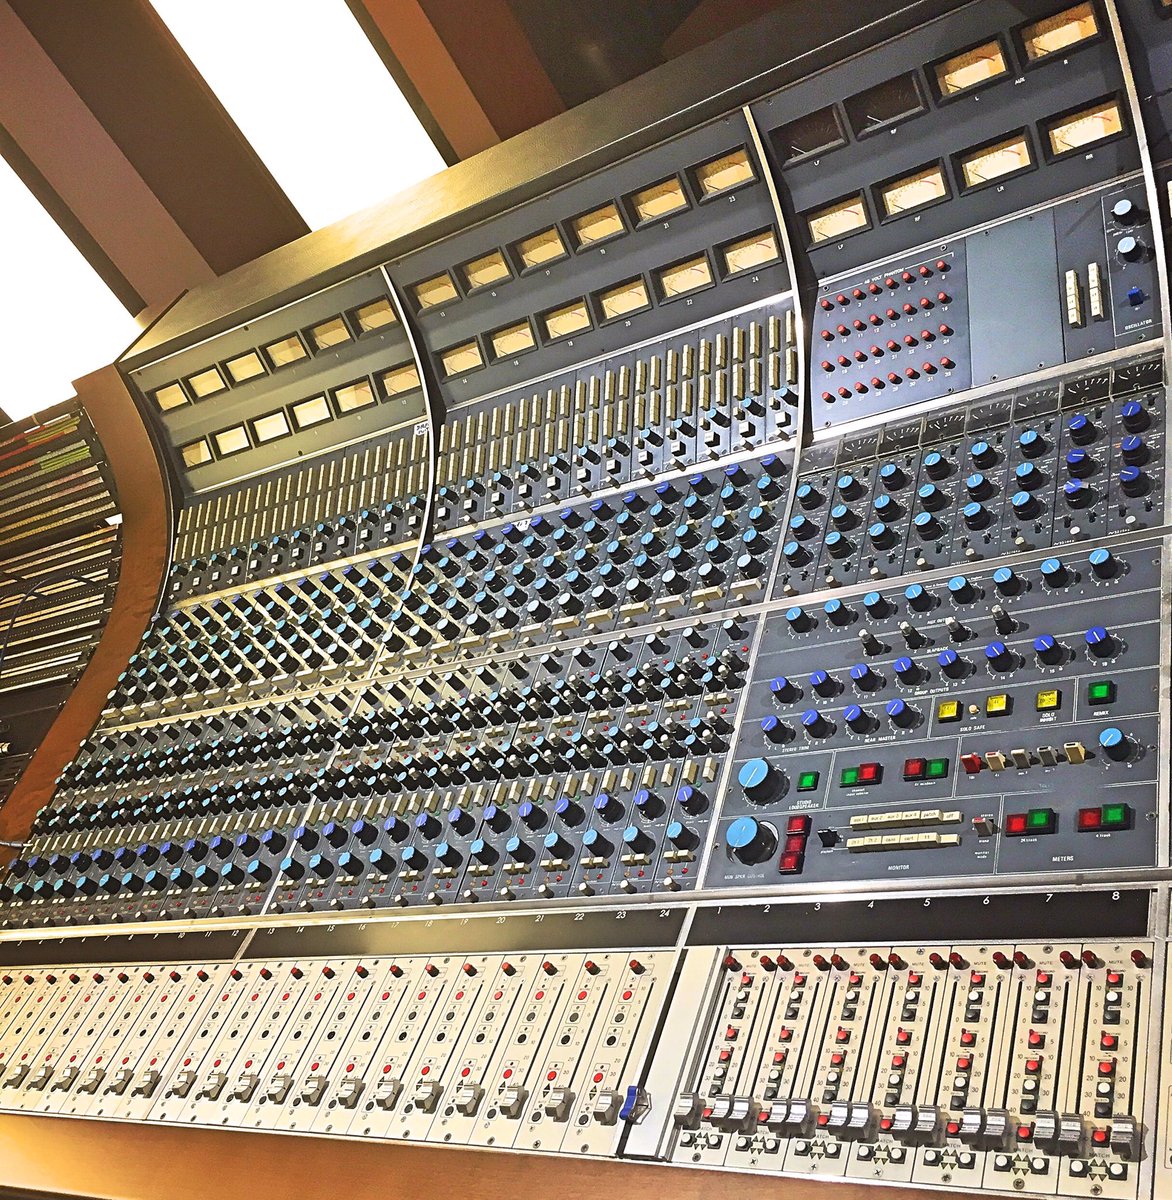 Prime Studio Gmbh On Twitter The Next Section Of Our Neve 8068